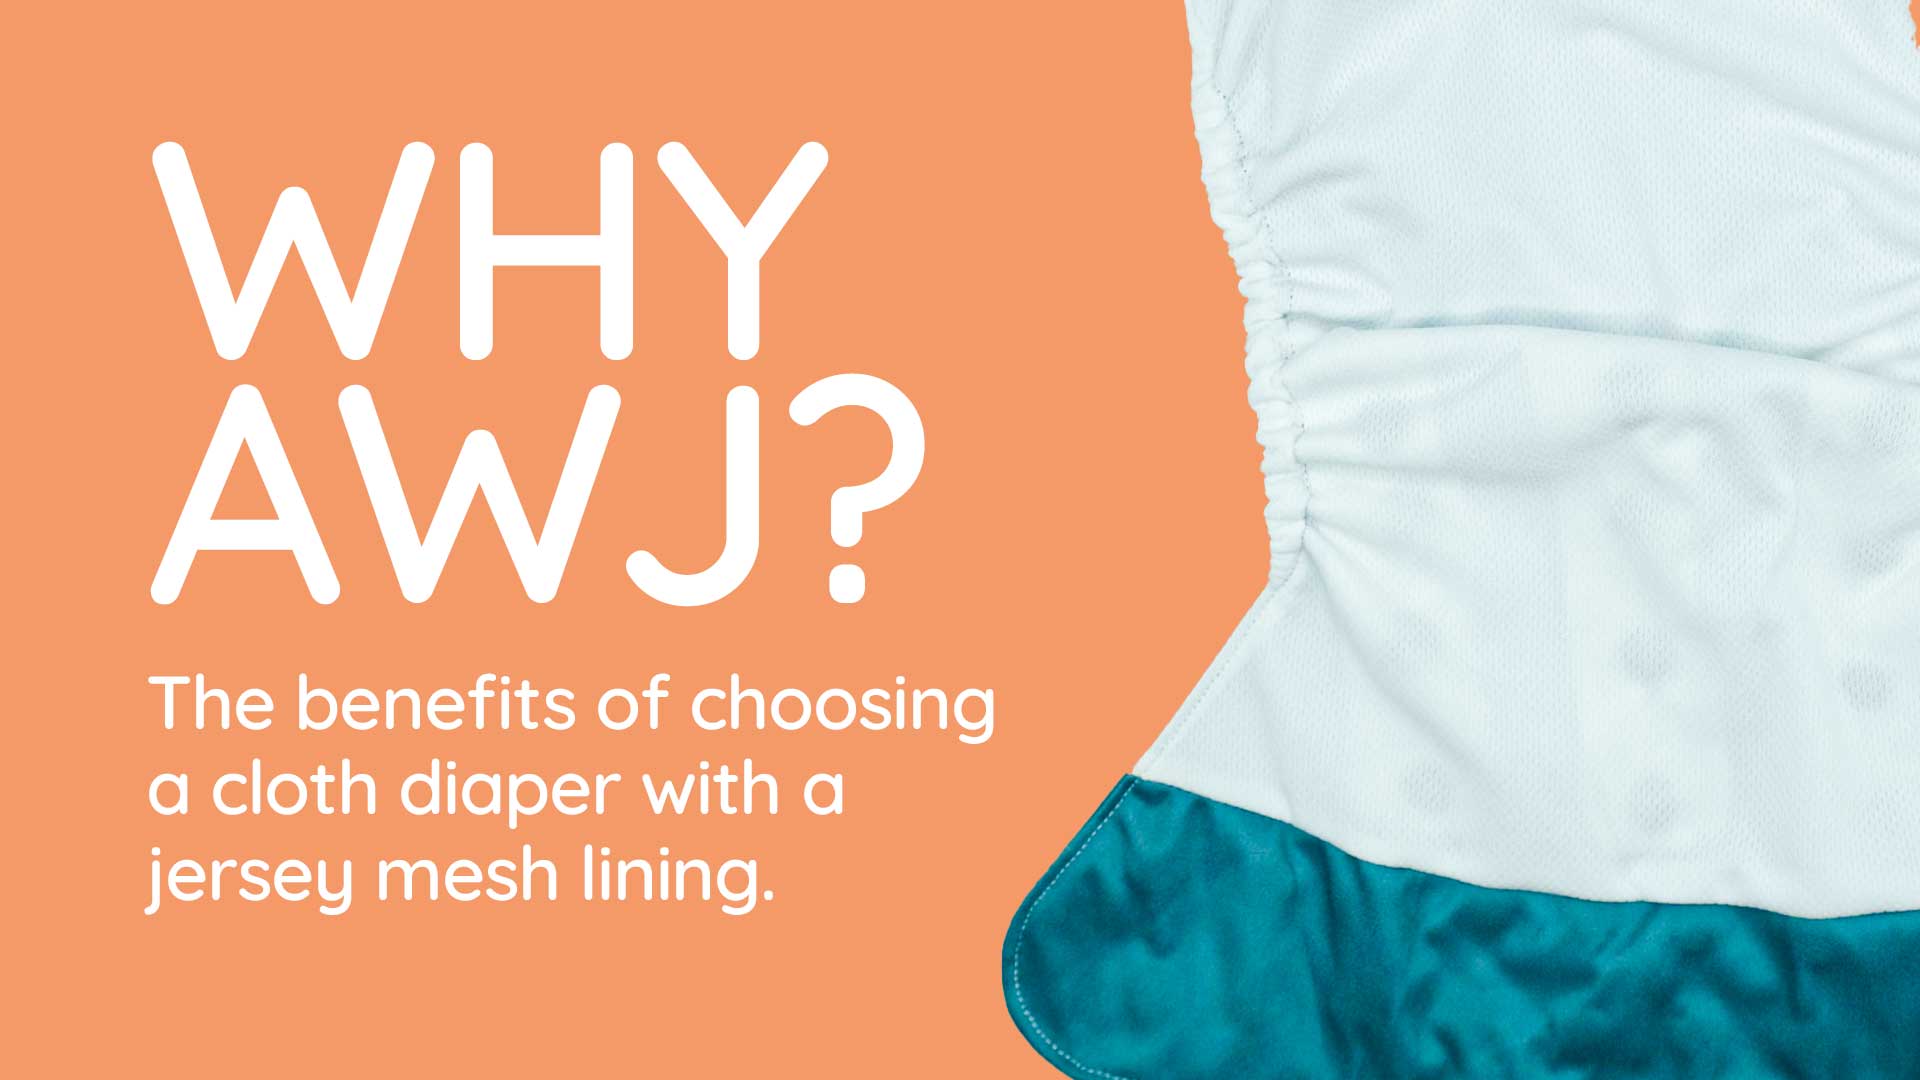 Why AWJ? Why are so many families obsessed with cloth diapers lined with athletic wicking jersey?